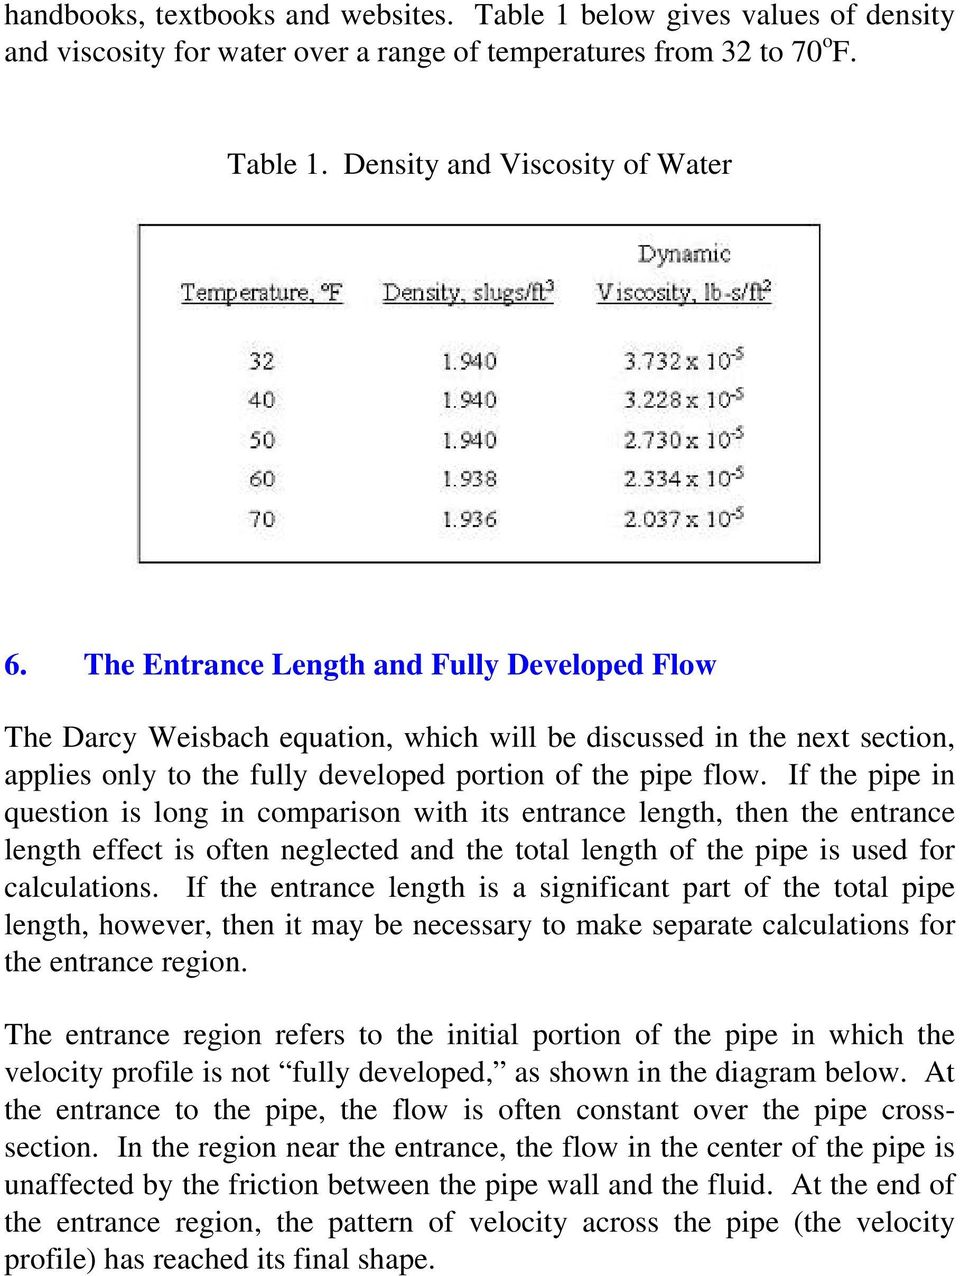 If the pipe in question is long in comparison with its entrance length, then the entrance length effect is often neglected and the total length of the pipe is used for calculations.